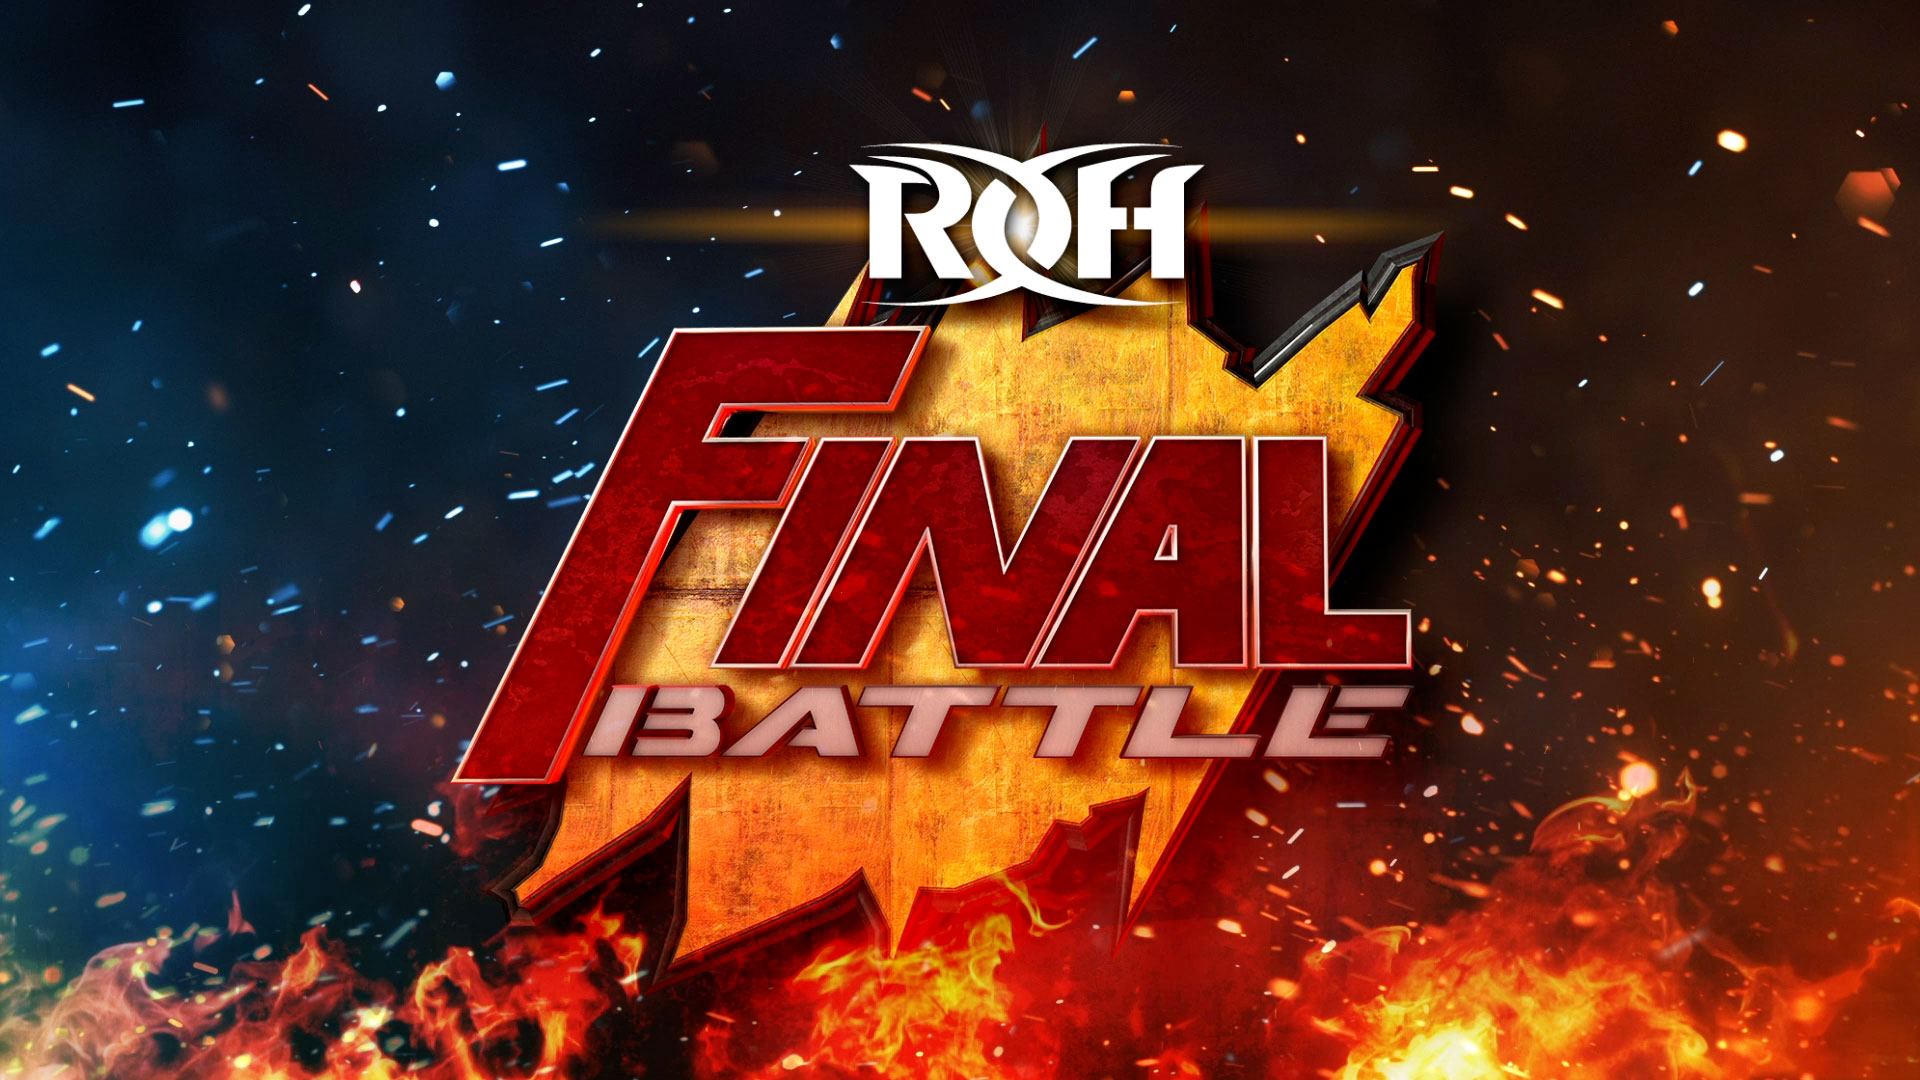 Update On Ticket Sales For ROH Final Battle